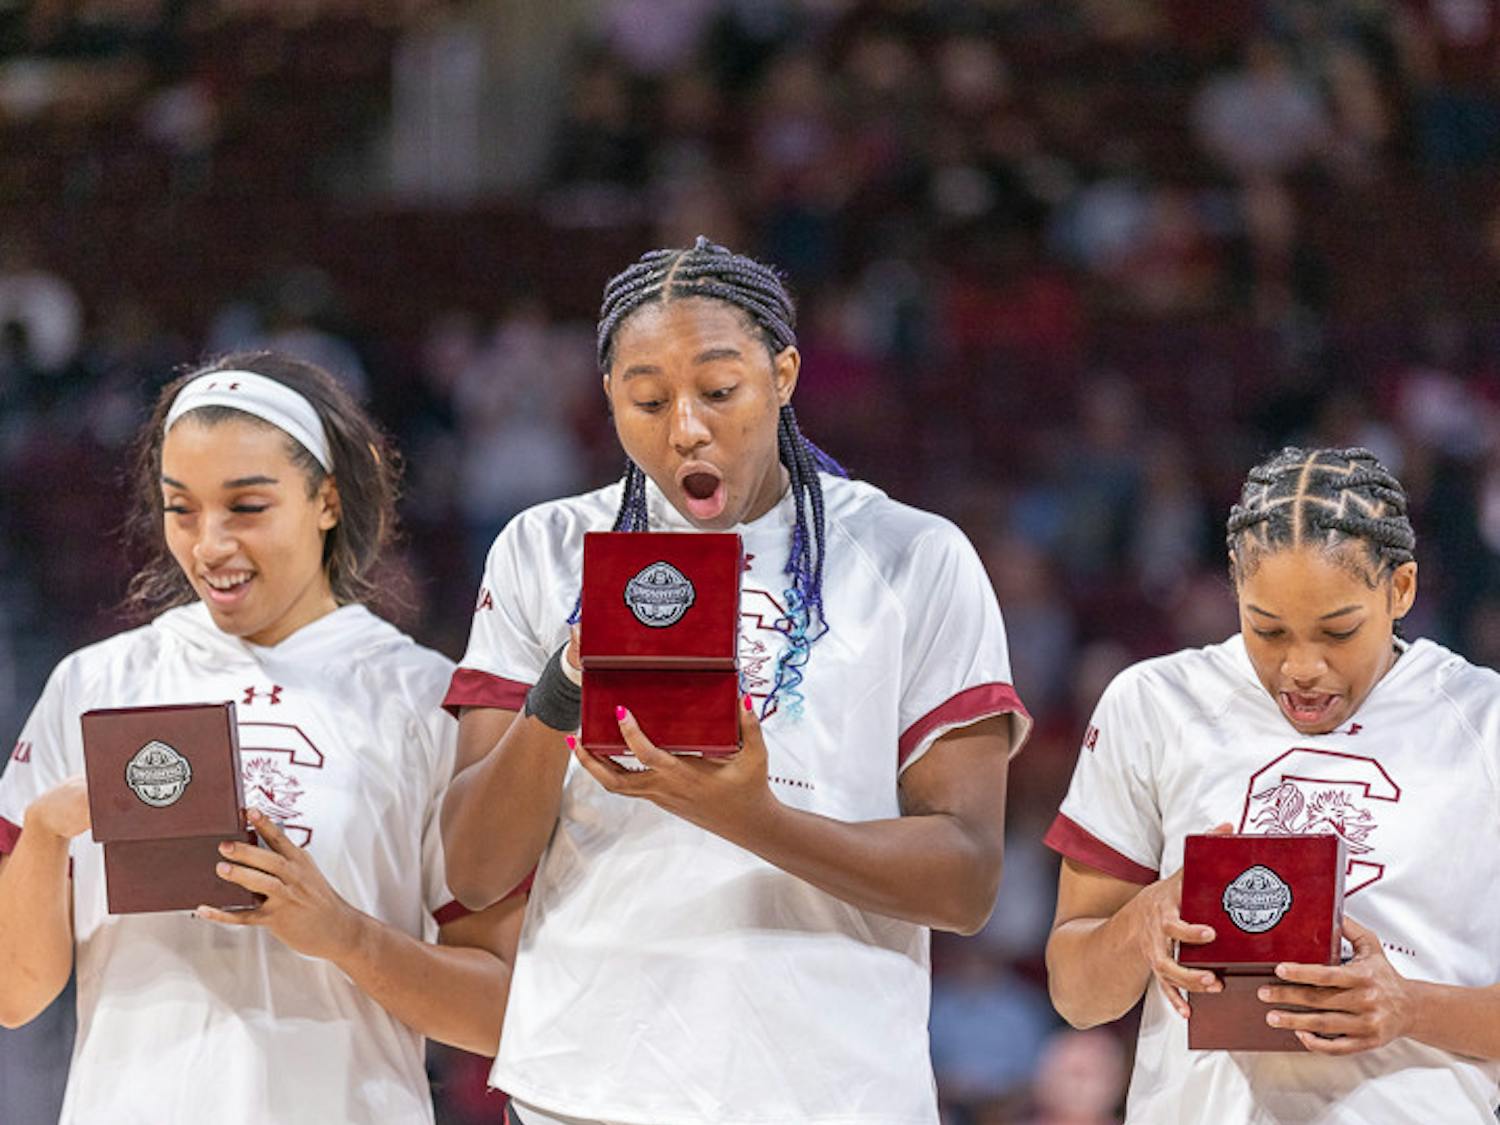 Senior forward Aliyah Boston (center) reacts to seeing her National Championship ring. South Carolina played East Tennessee State on Nov. 7, 2022. The Gamecocks beat East Tennessee State 101- 31.